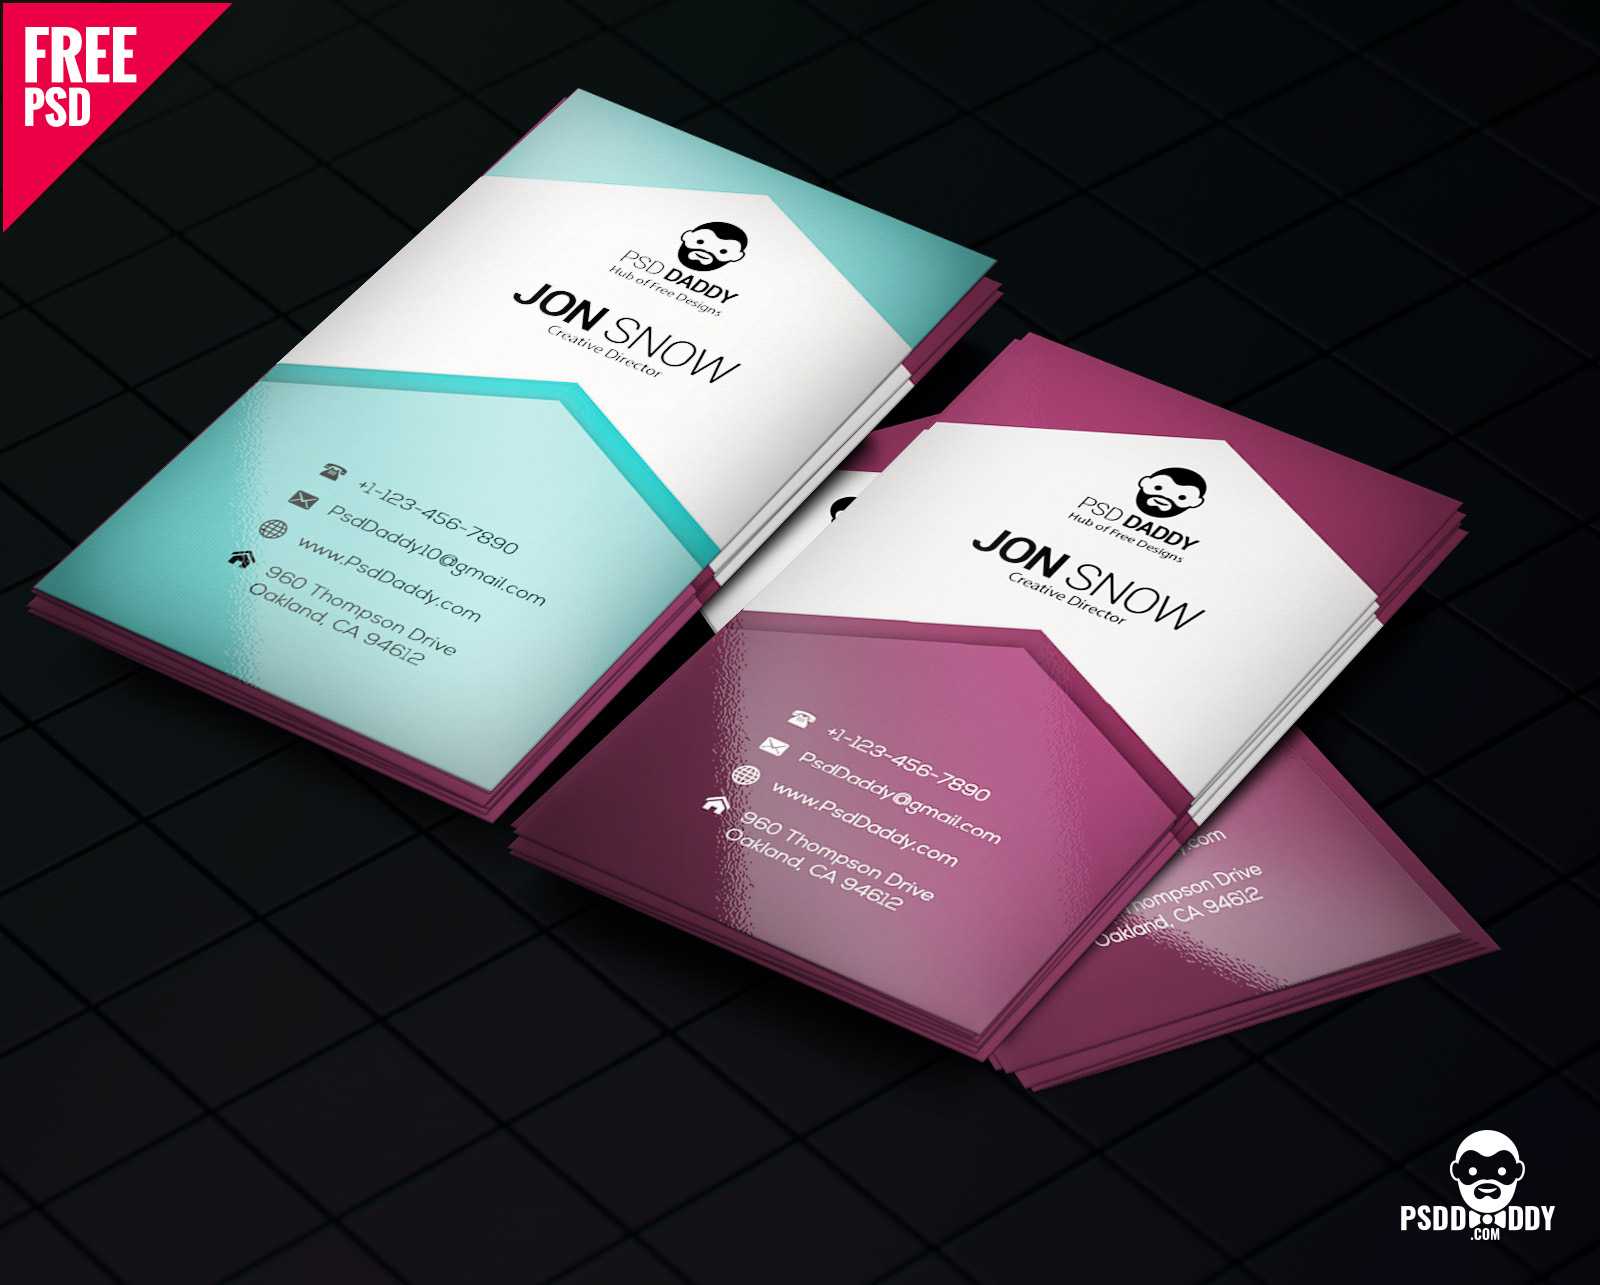 Download]Creative Business Card Psd Free | Psddaddy In Business Card Size Template Photoshop